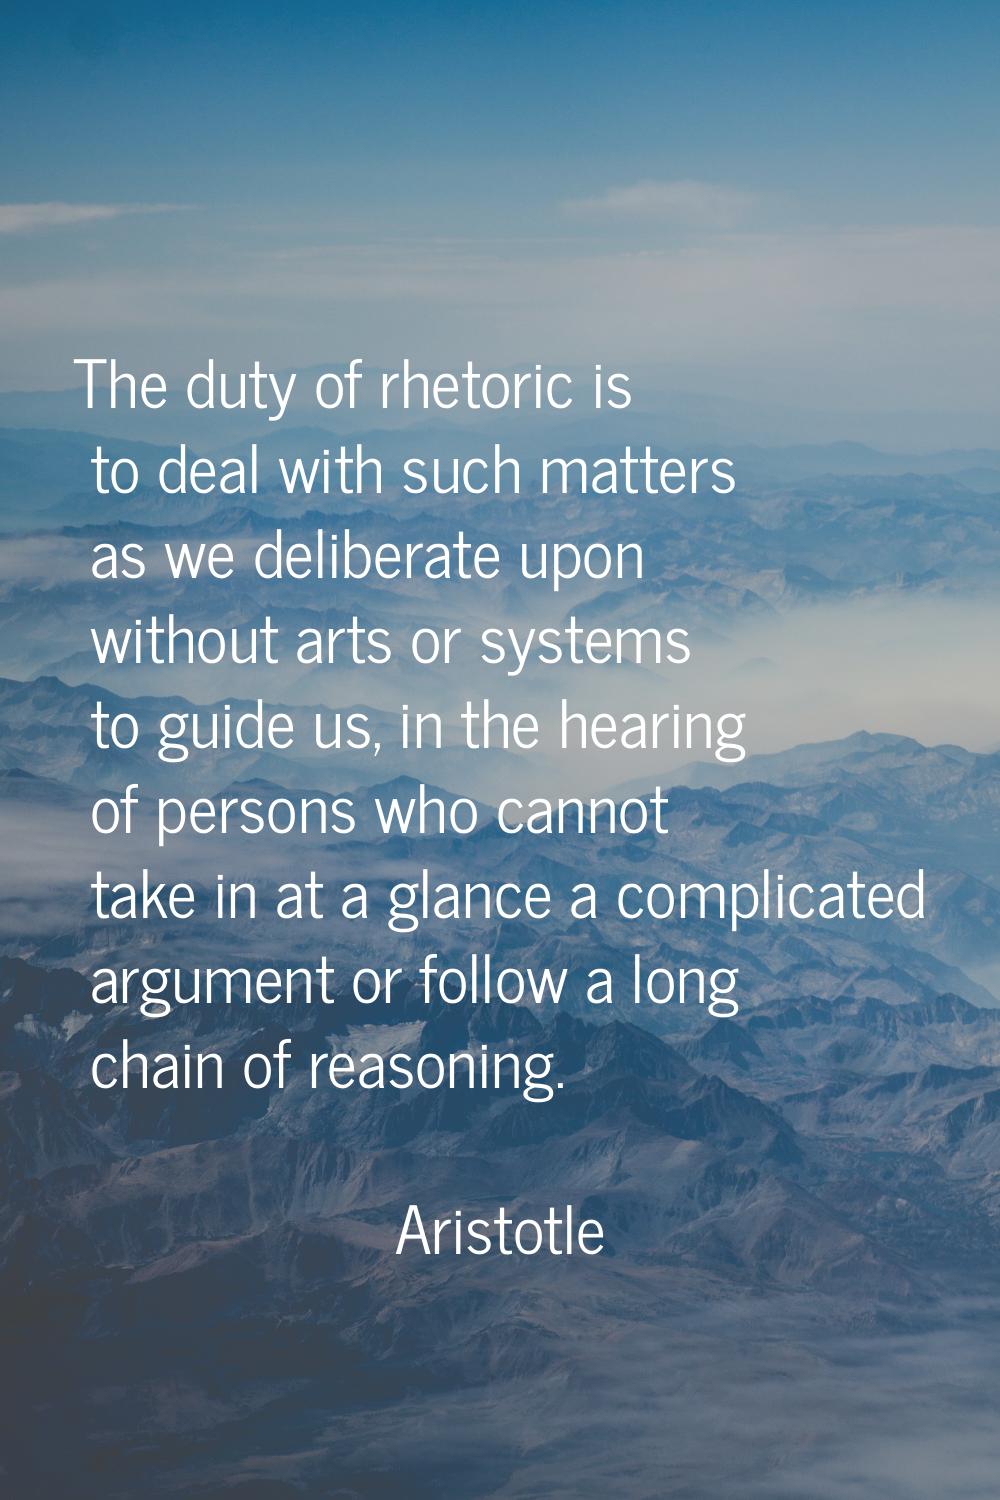 The duty of rhetoric is to deal with such matters as we deliberate upon without arts or systems to 